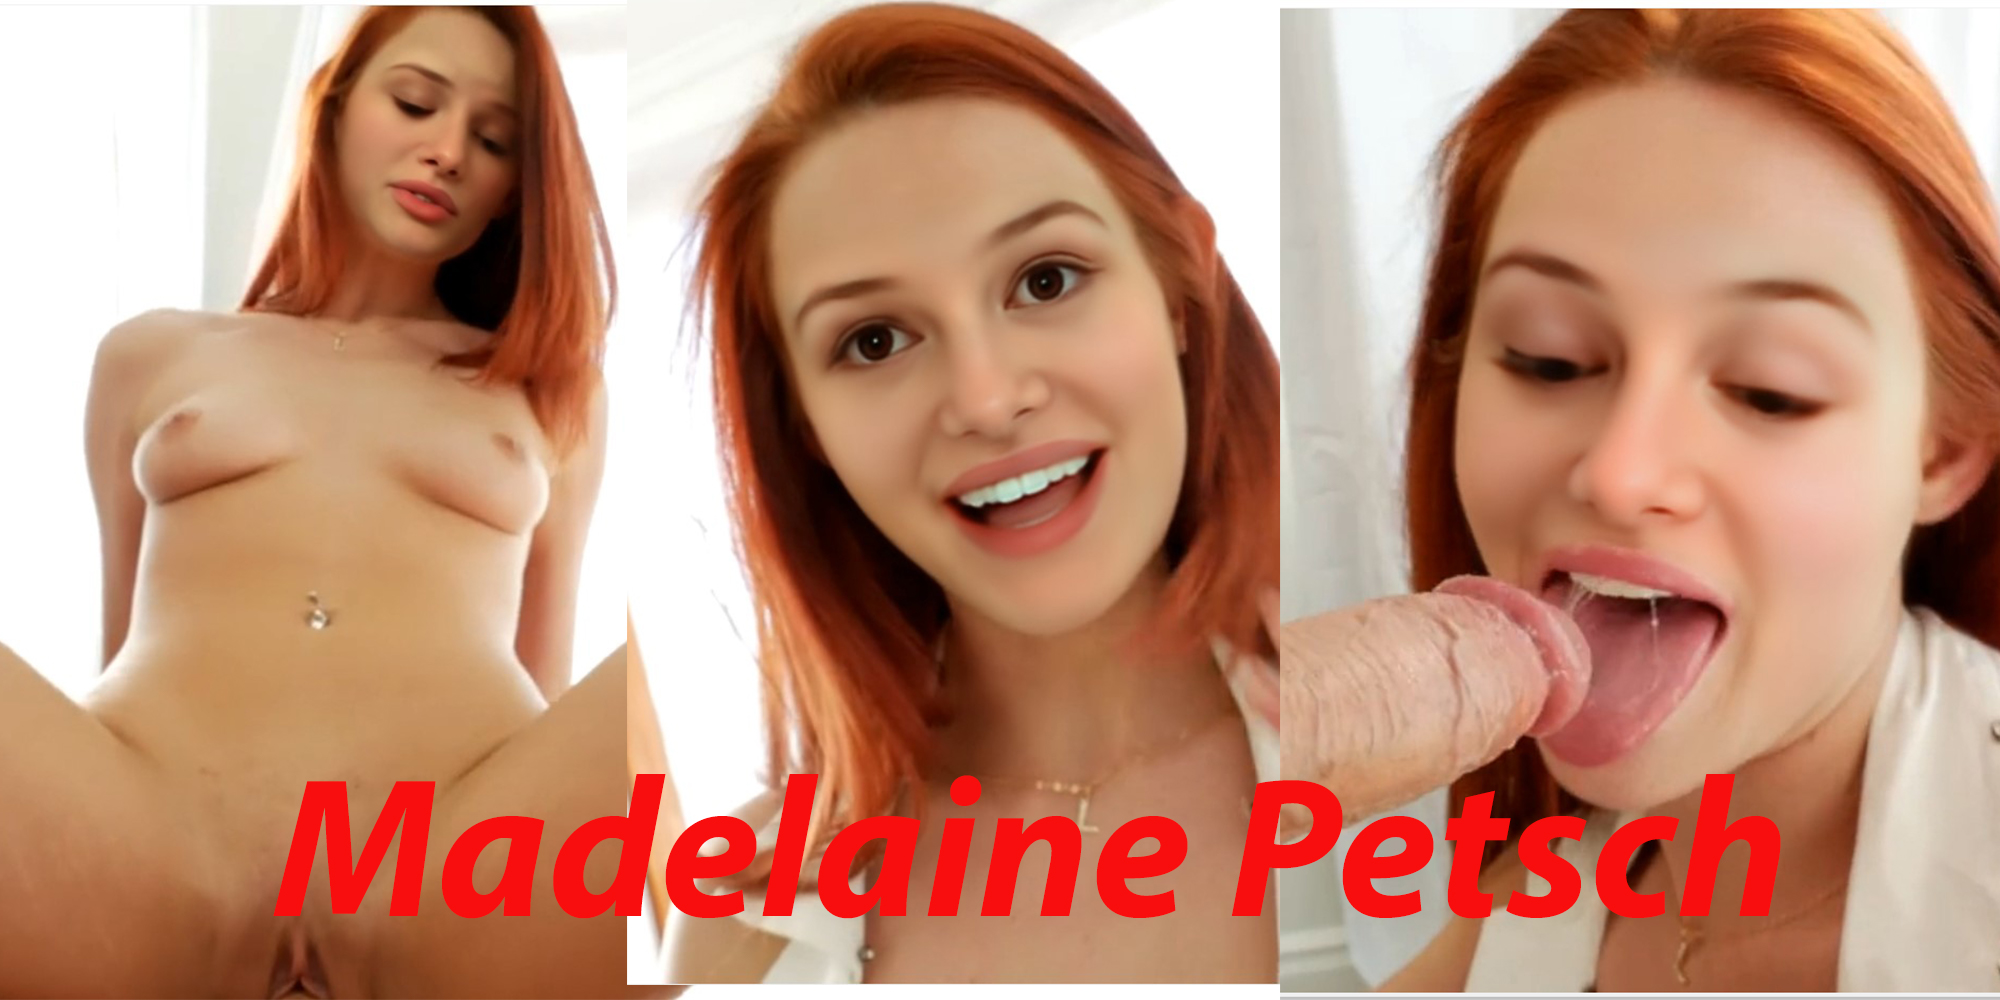 Madelaine Petsch asks her daddy for help (full version)